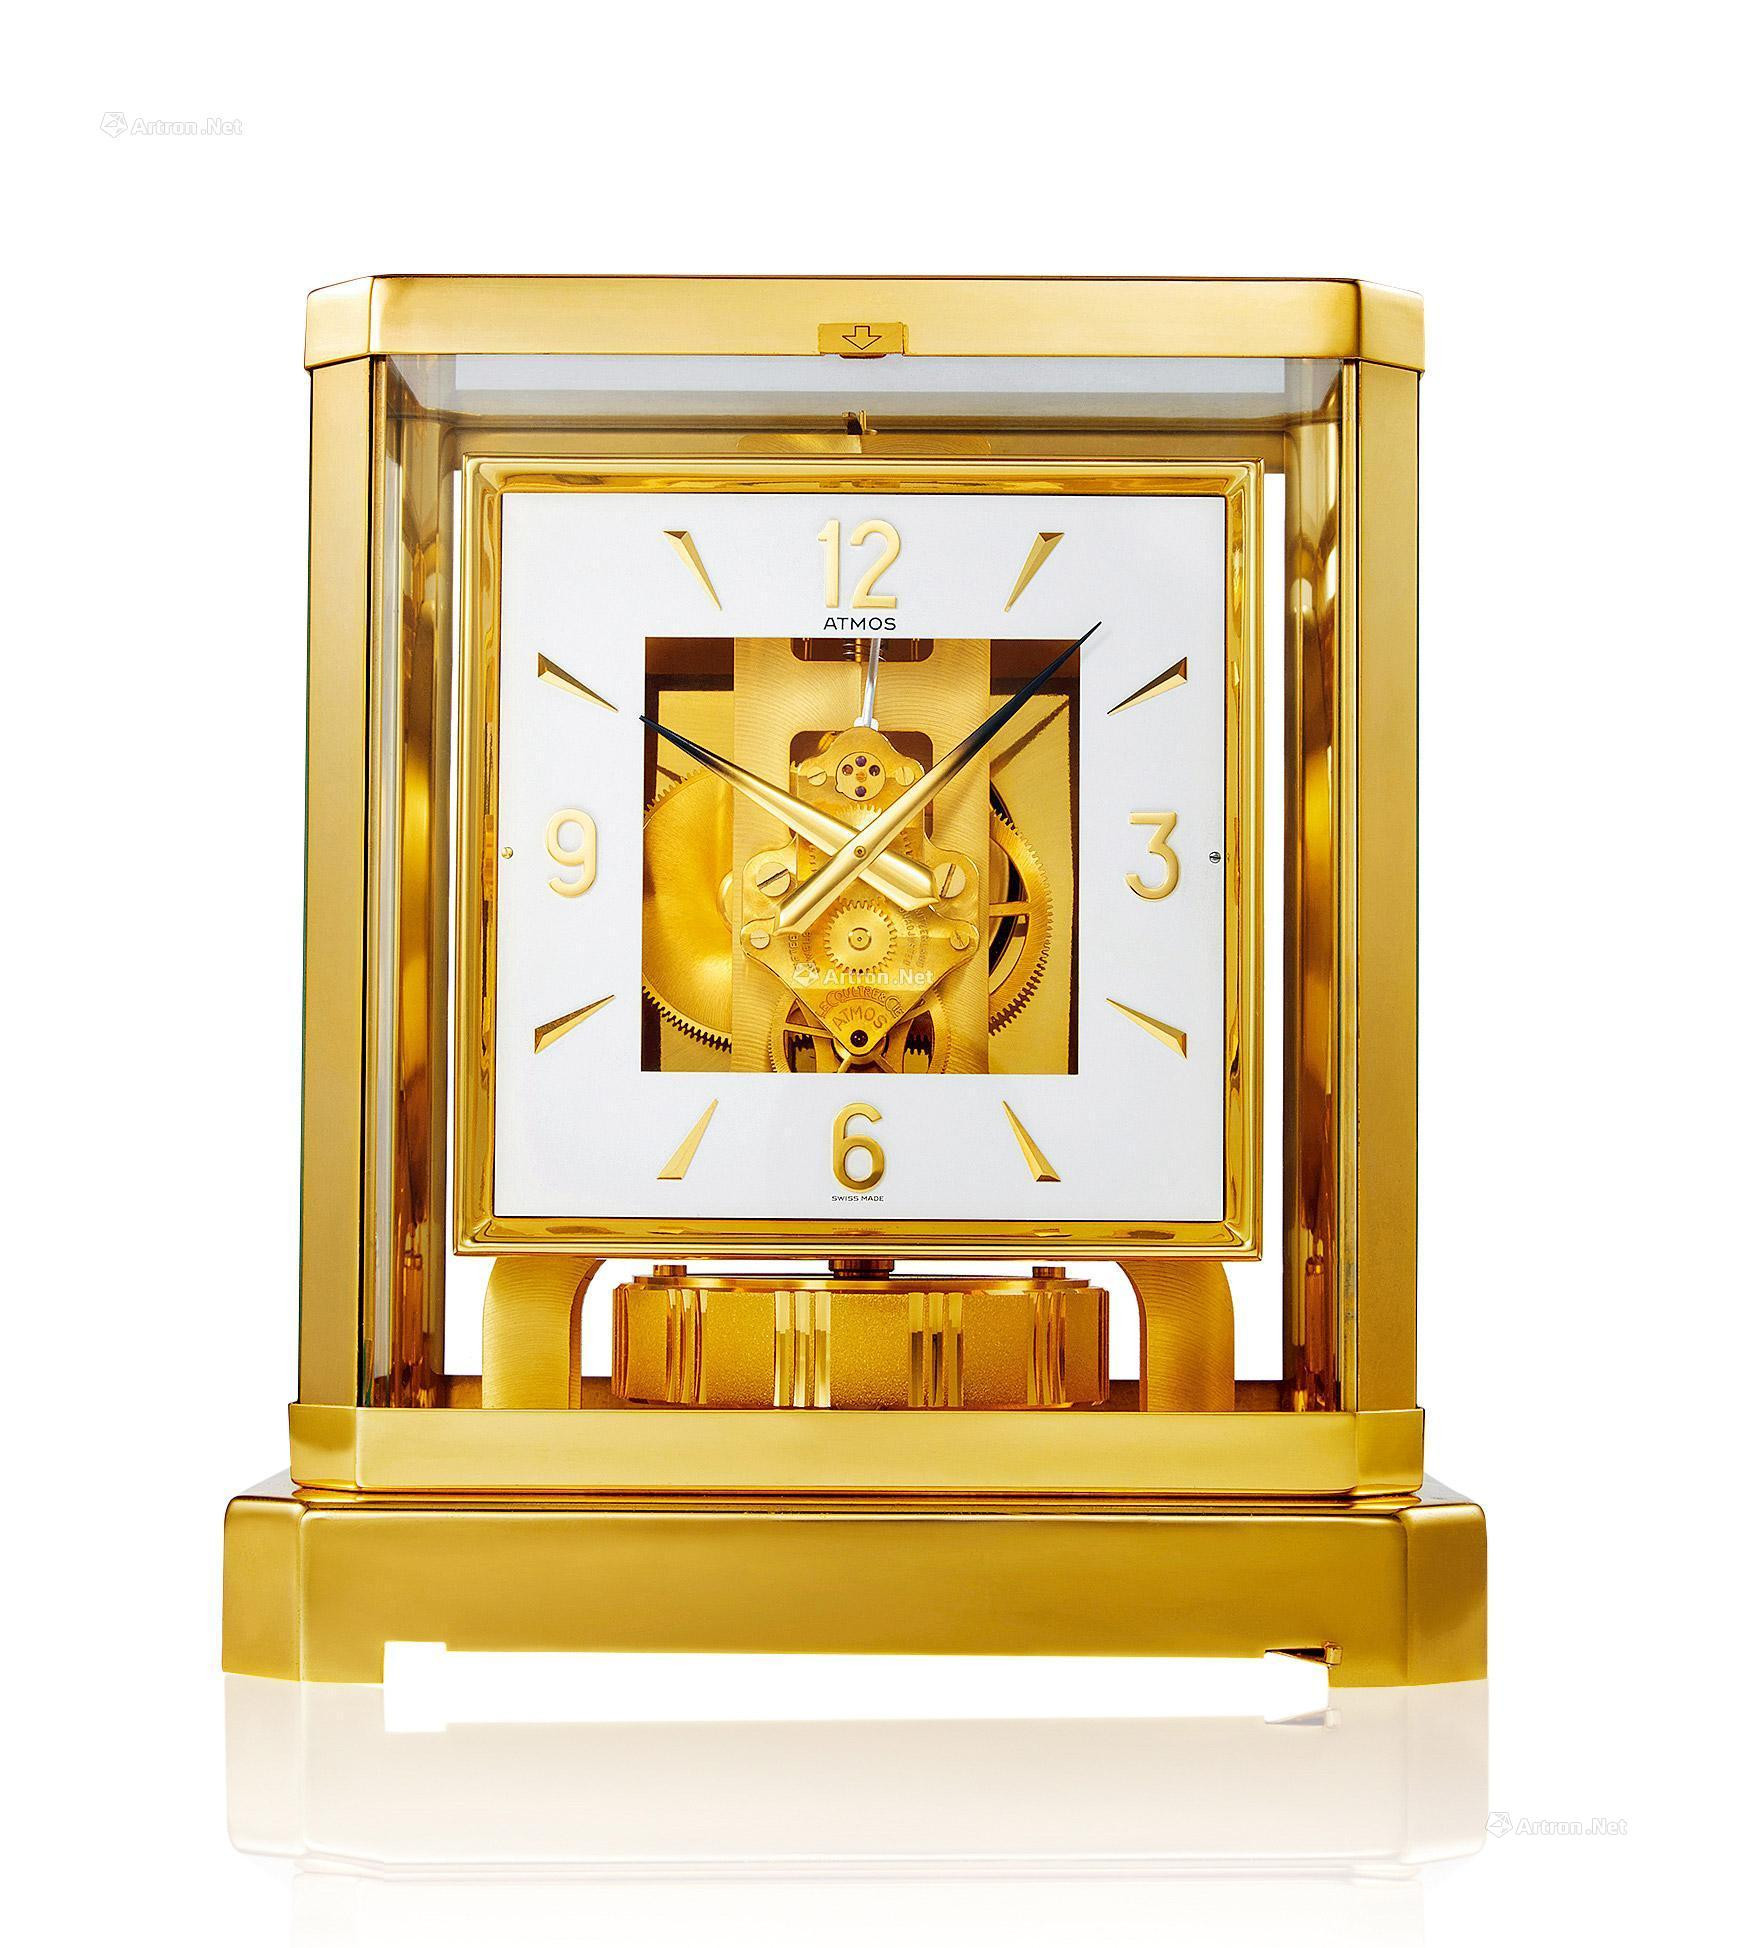 JAEGER-LECOULTRE A FINE CLASSIC GILT BRONZE ATMOS CLOCK WITH SKELETONISED DIAL